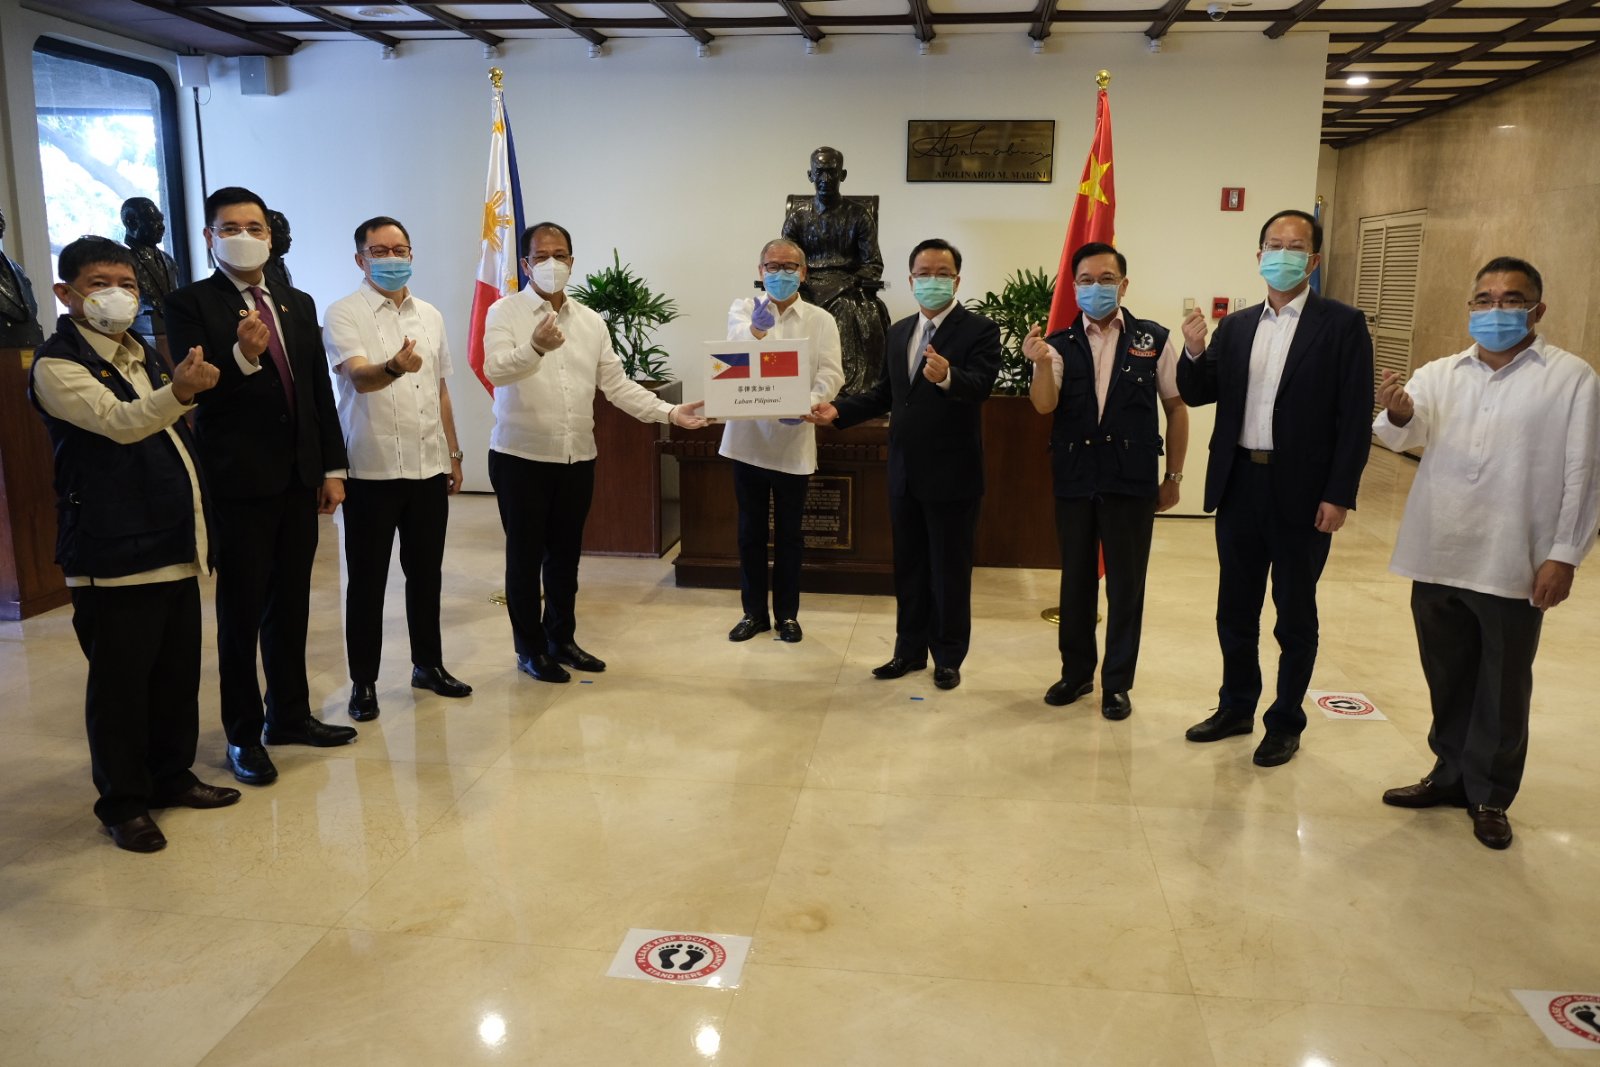 The Philippine government receives a new batch of 150,000 COVID-19 testing kits from the People’s Republic of China on Sunday, May 10. DFA